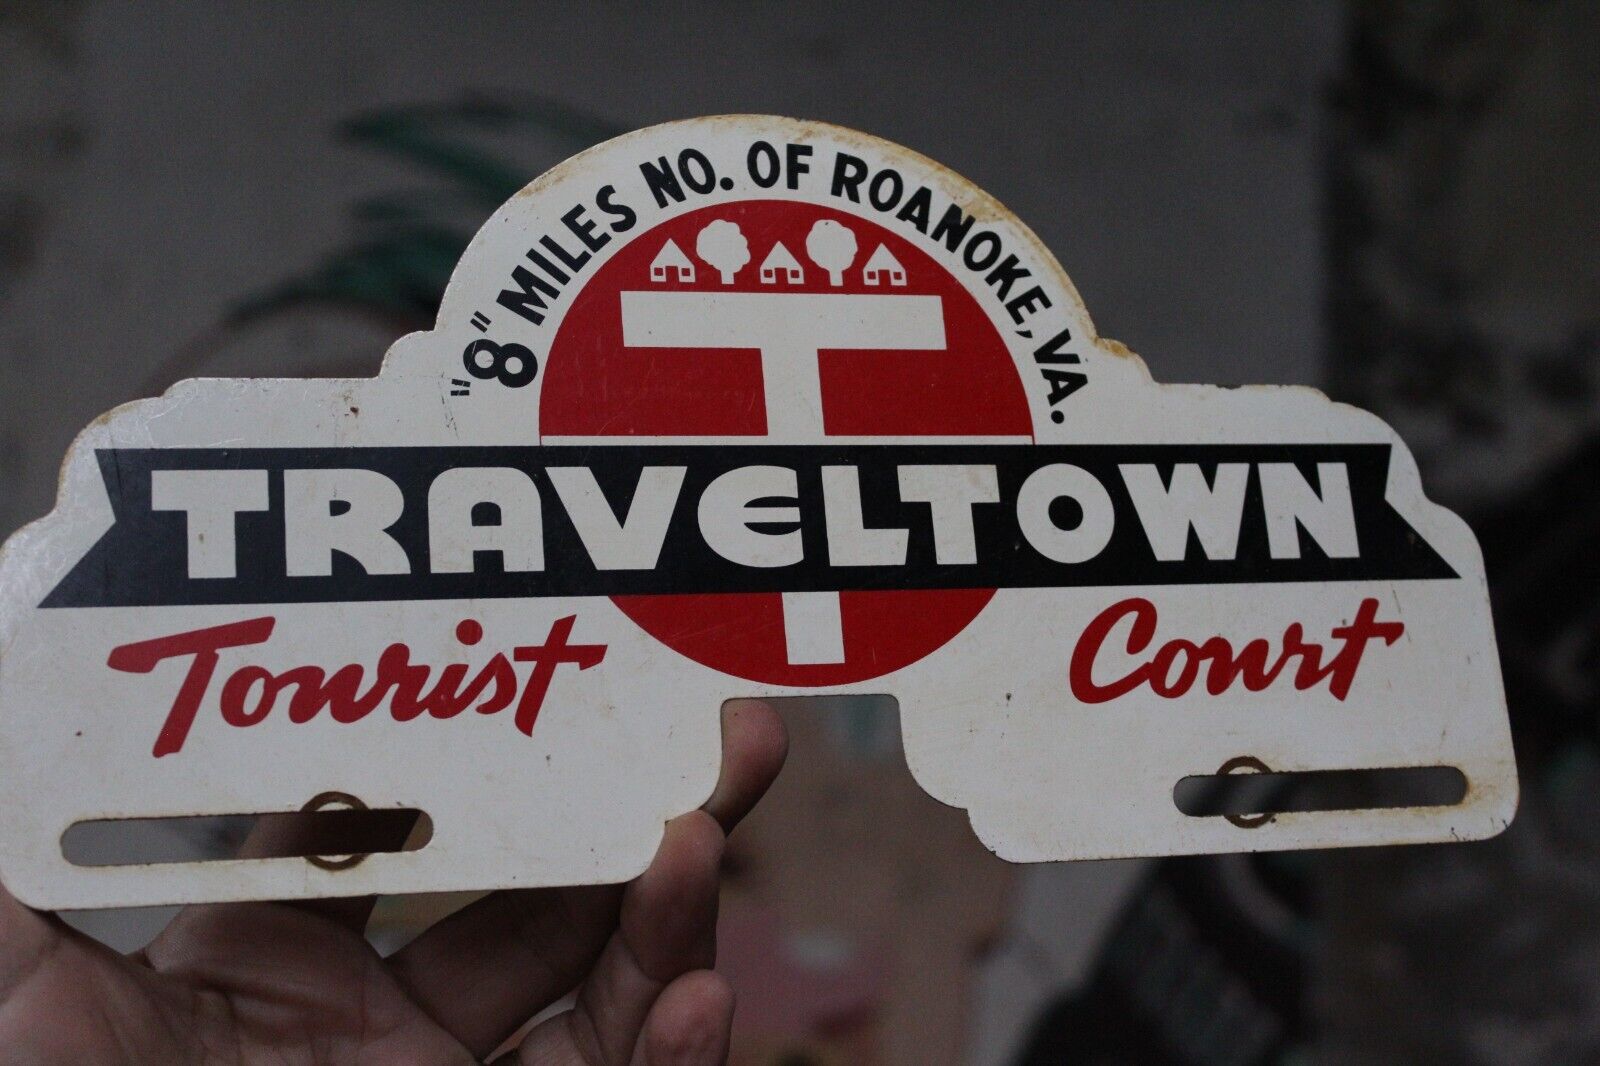 1950s TRAVELTOWN TOURIST COURT ROANOKE VIRGINIA PAINTED METAL PLATE TOPPER SIGN